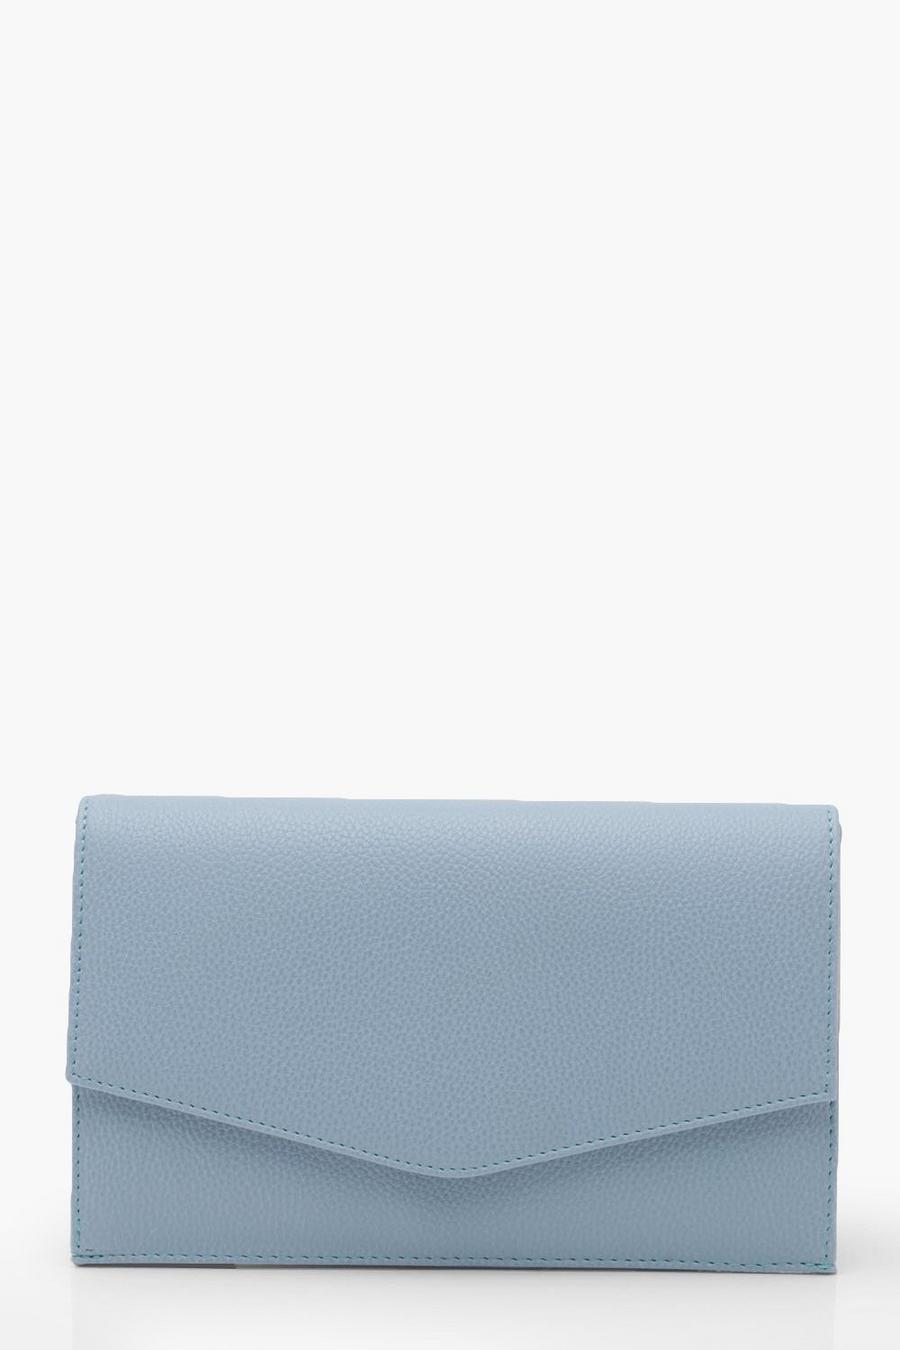 Blue Grainy PU Envelope Clutch Bag and Chain image number 1